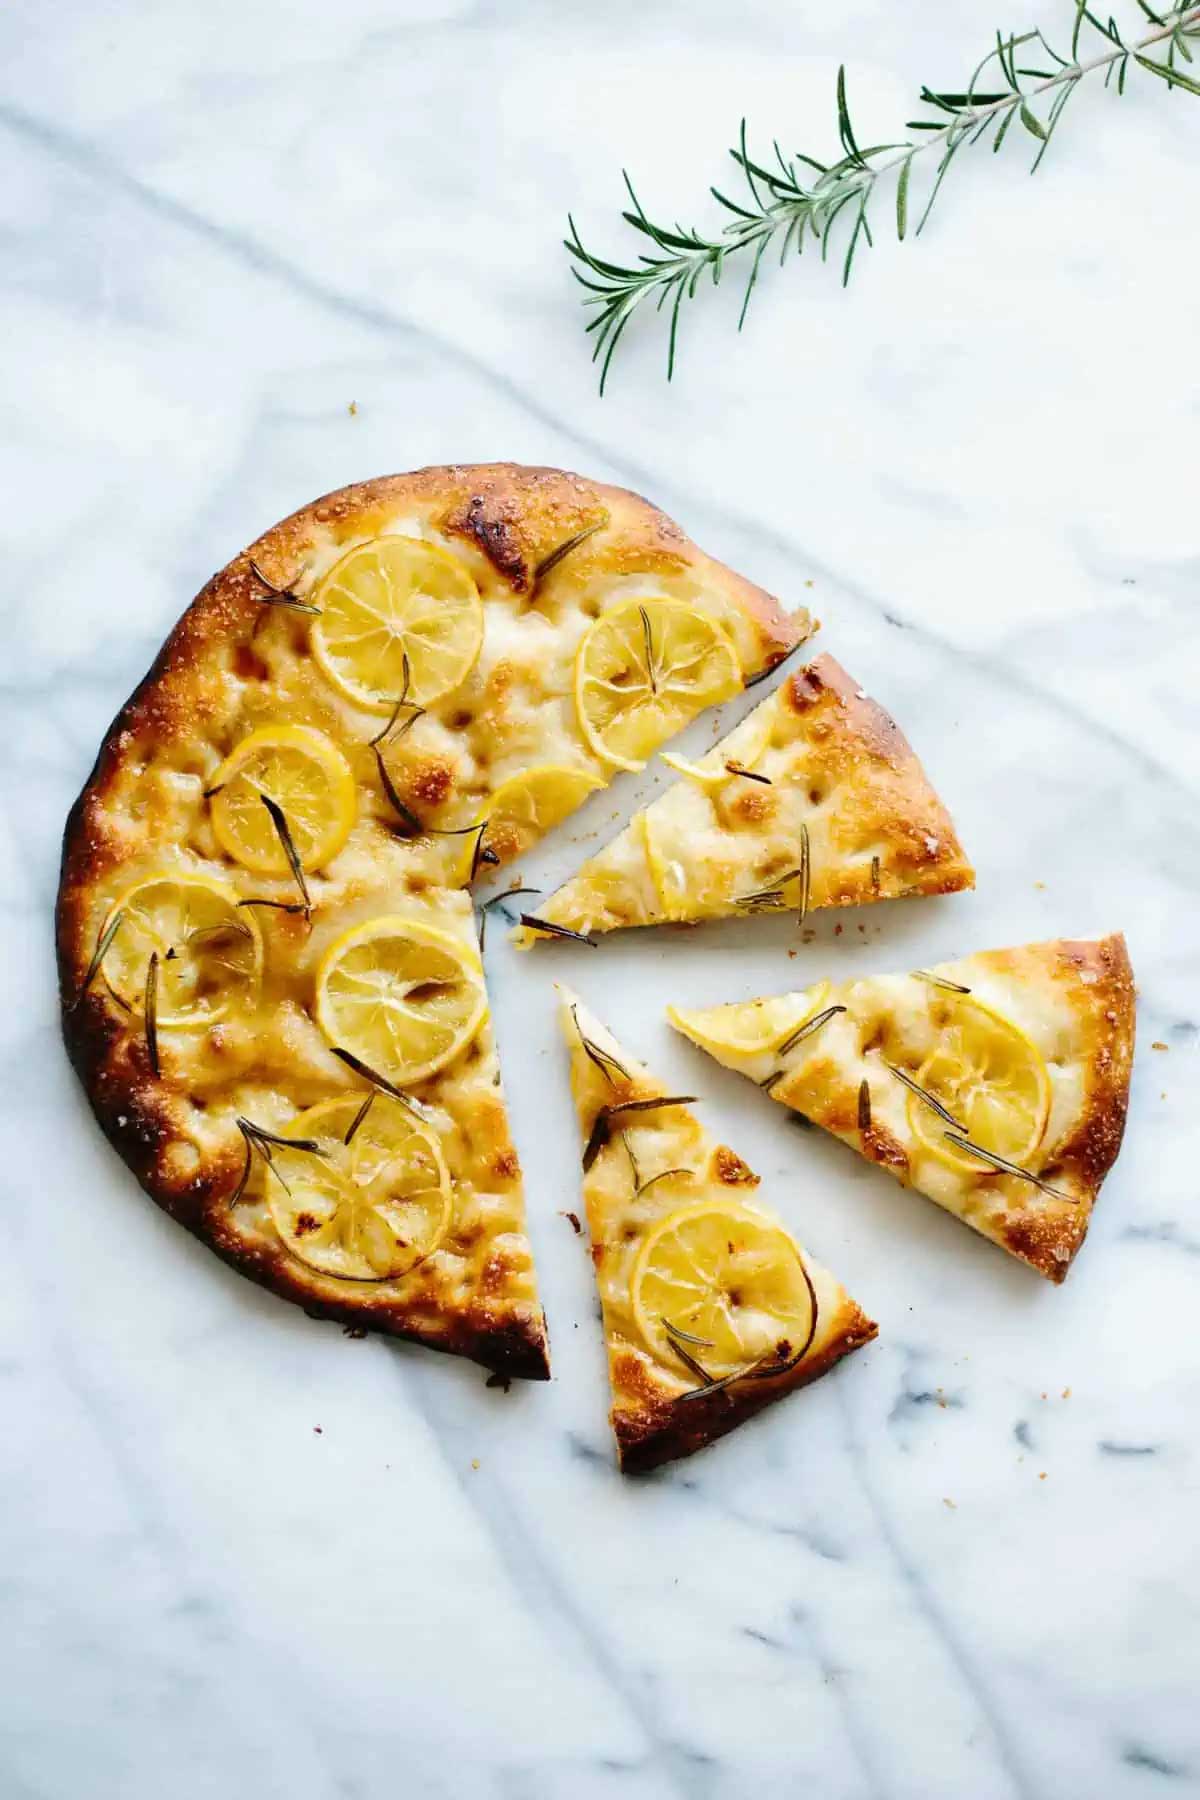 Top view of a circular lemon focaccia on white marble. Half of it is cut into slices.